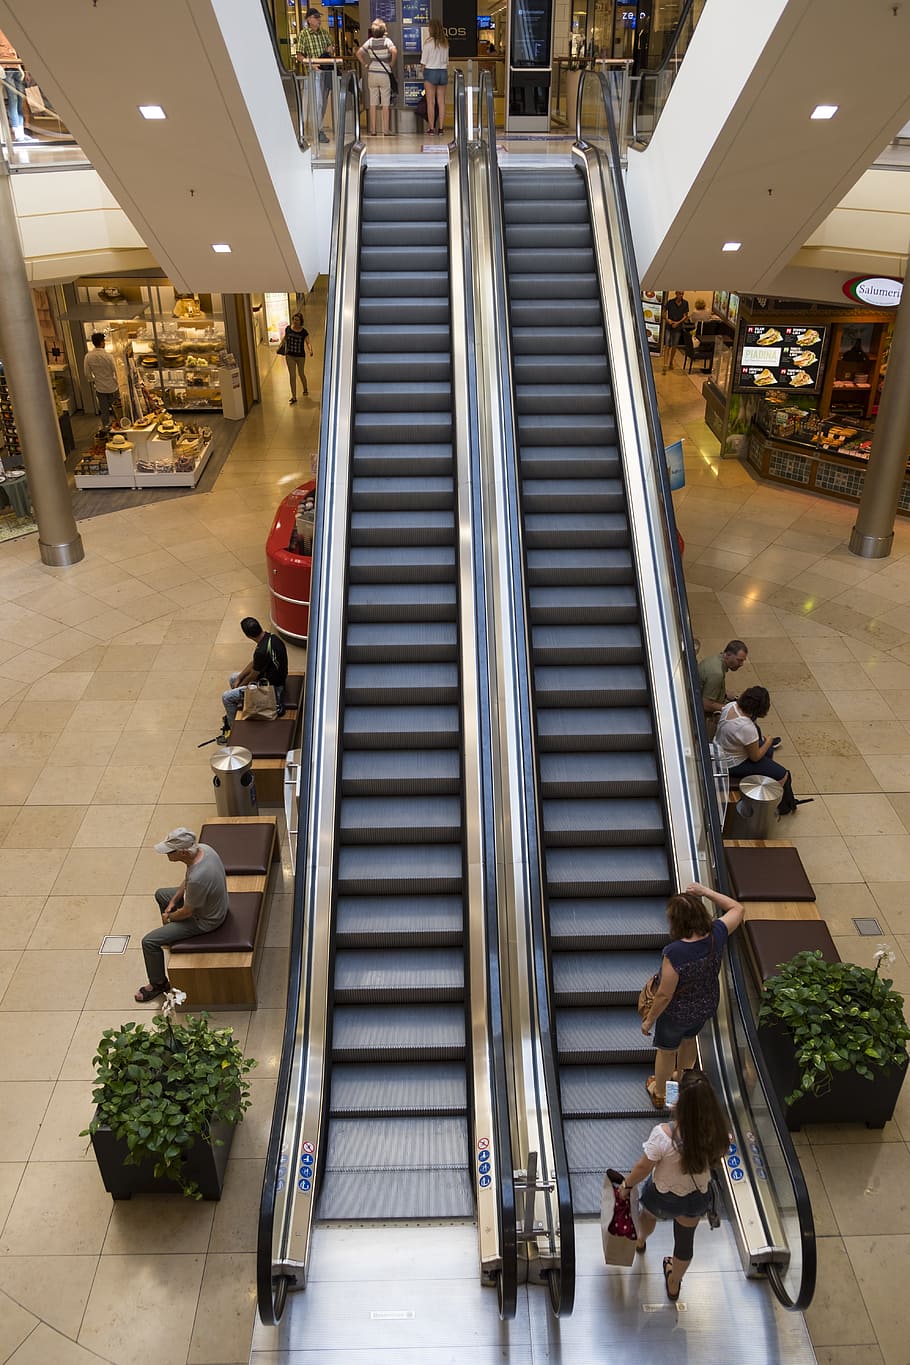 shopping, schoppen, shopping centre, stairs, escalator, architecture, gradually, means of rail transport, roller platform, commercial building